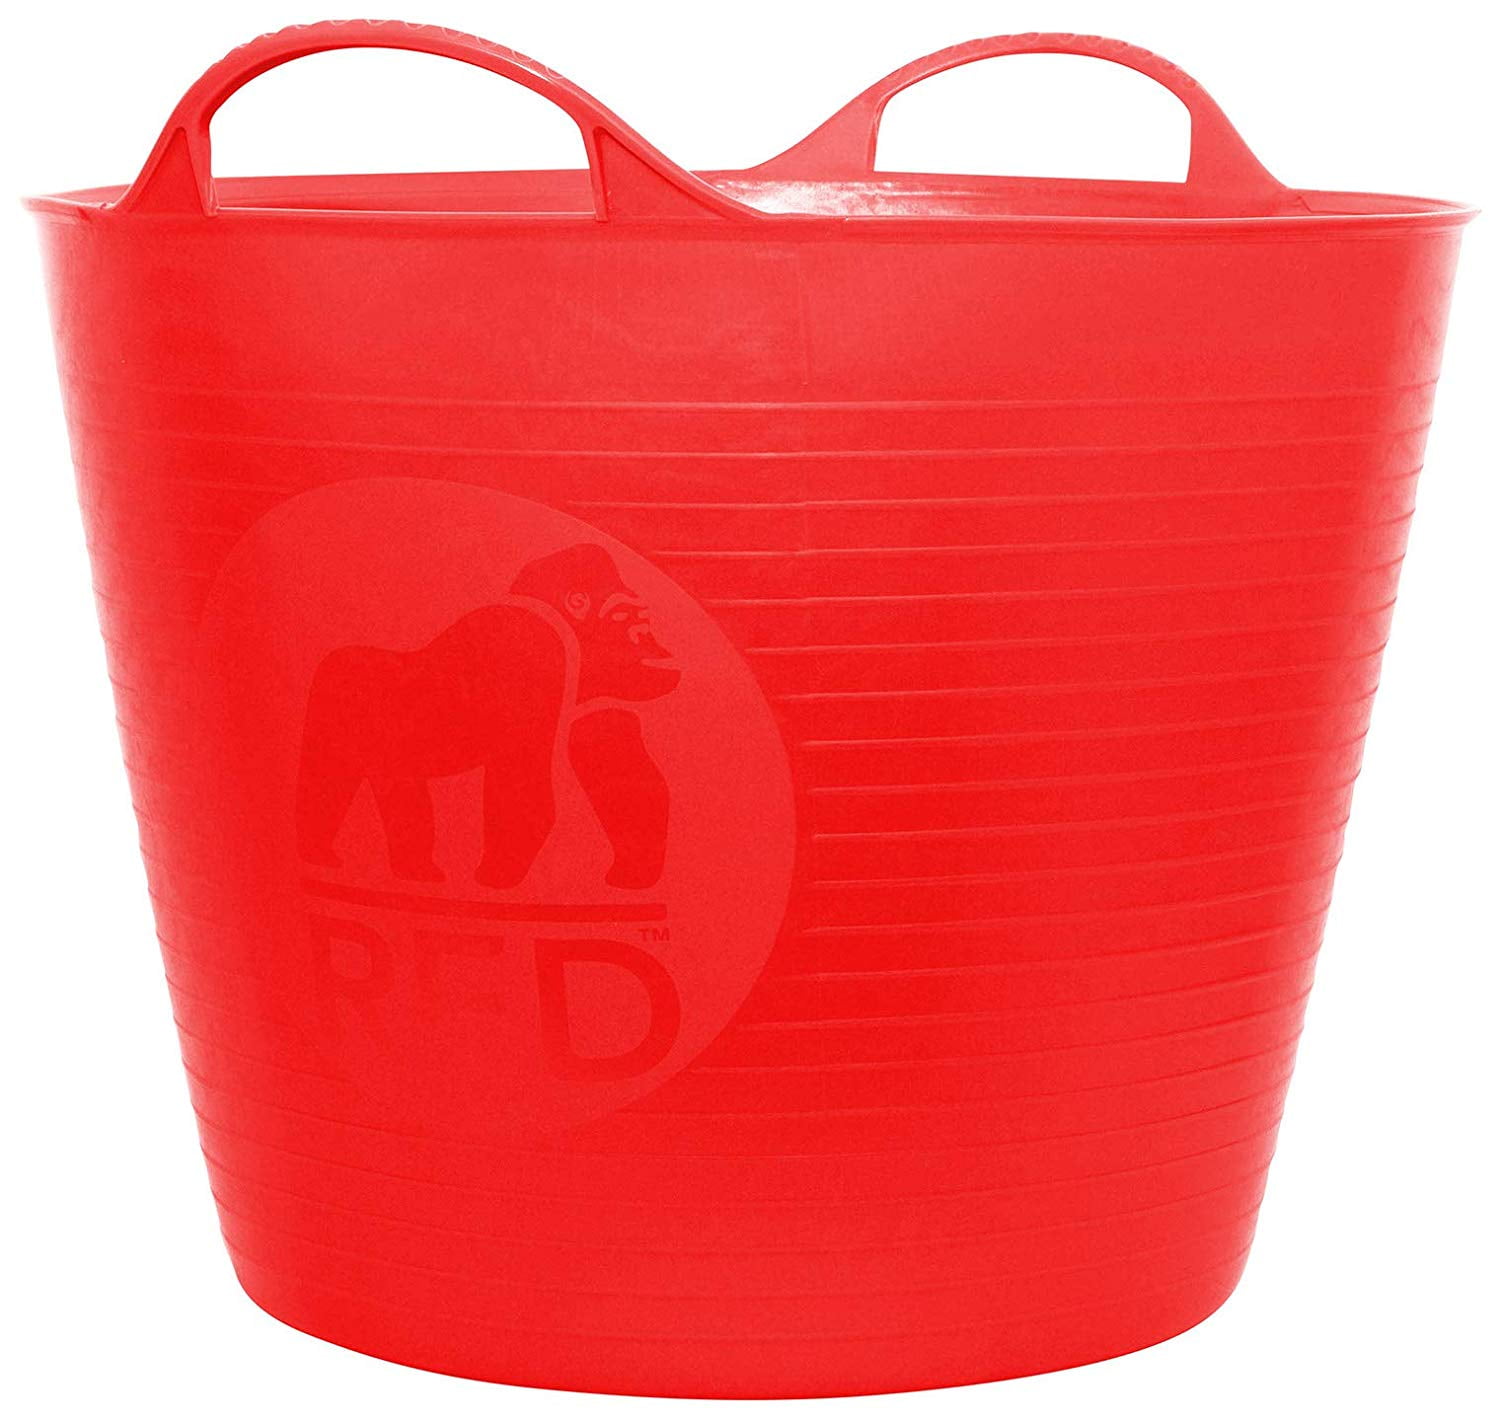 Tubtrugs Flexible Bucket ALL SIZES AND COLOURS Blue, Medium 26 Litre